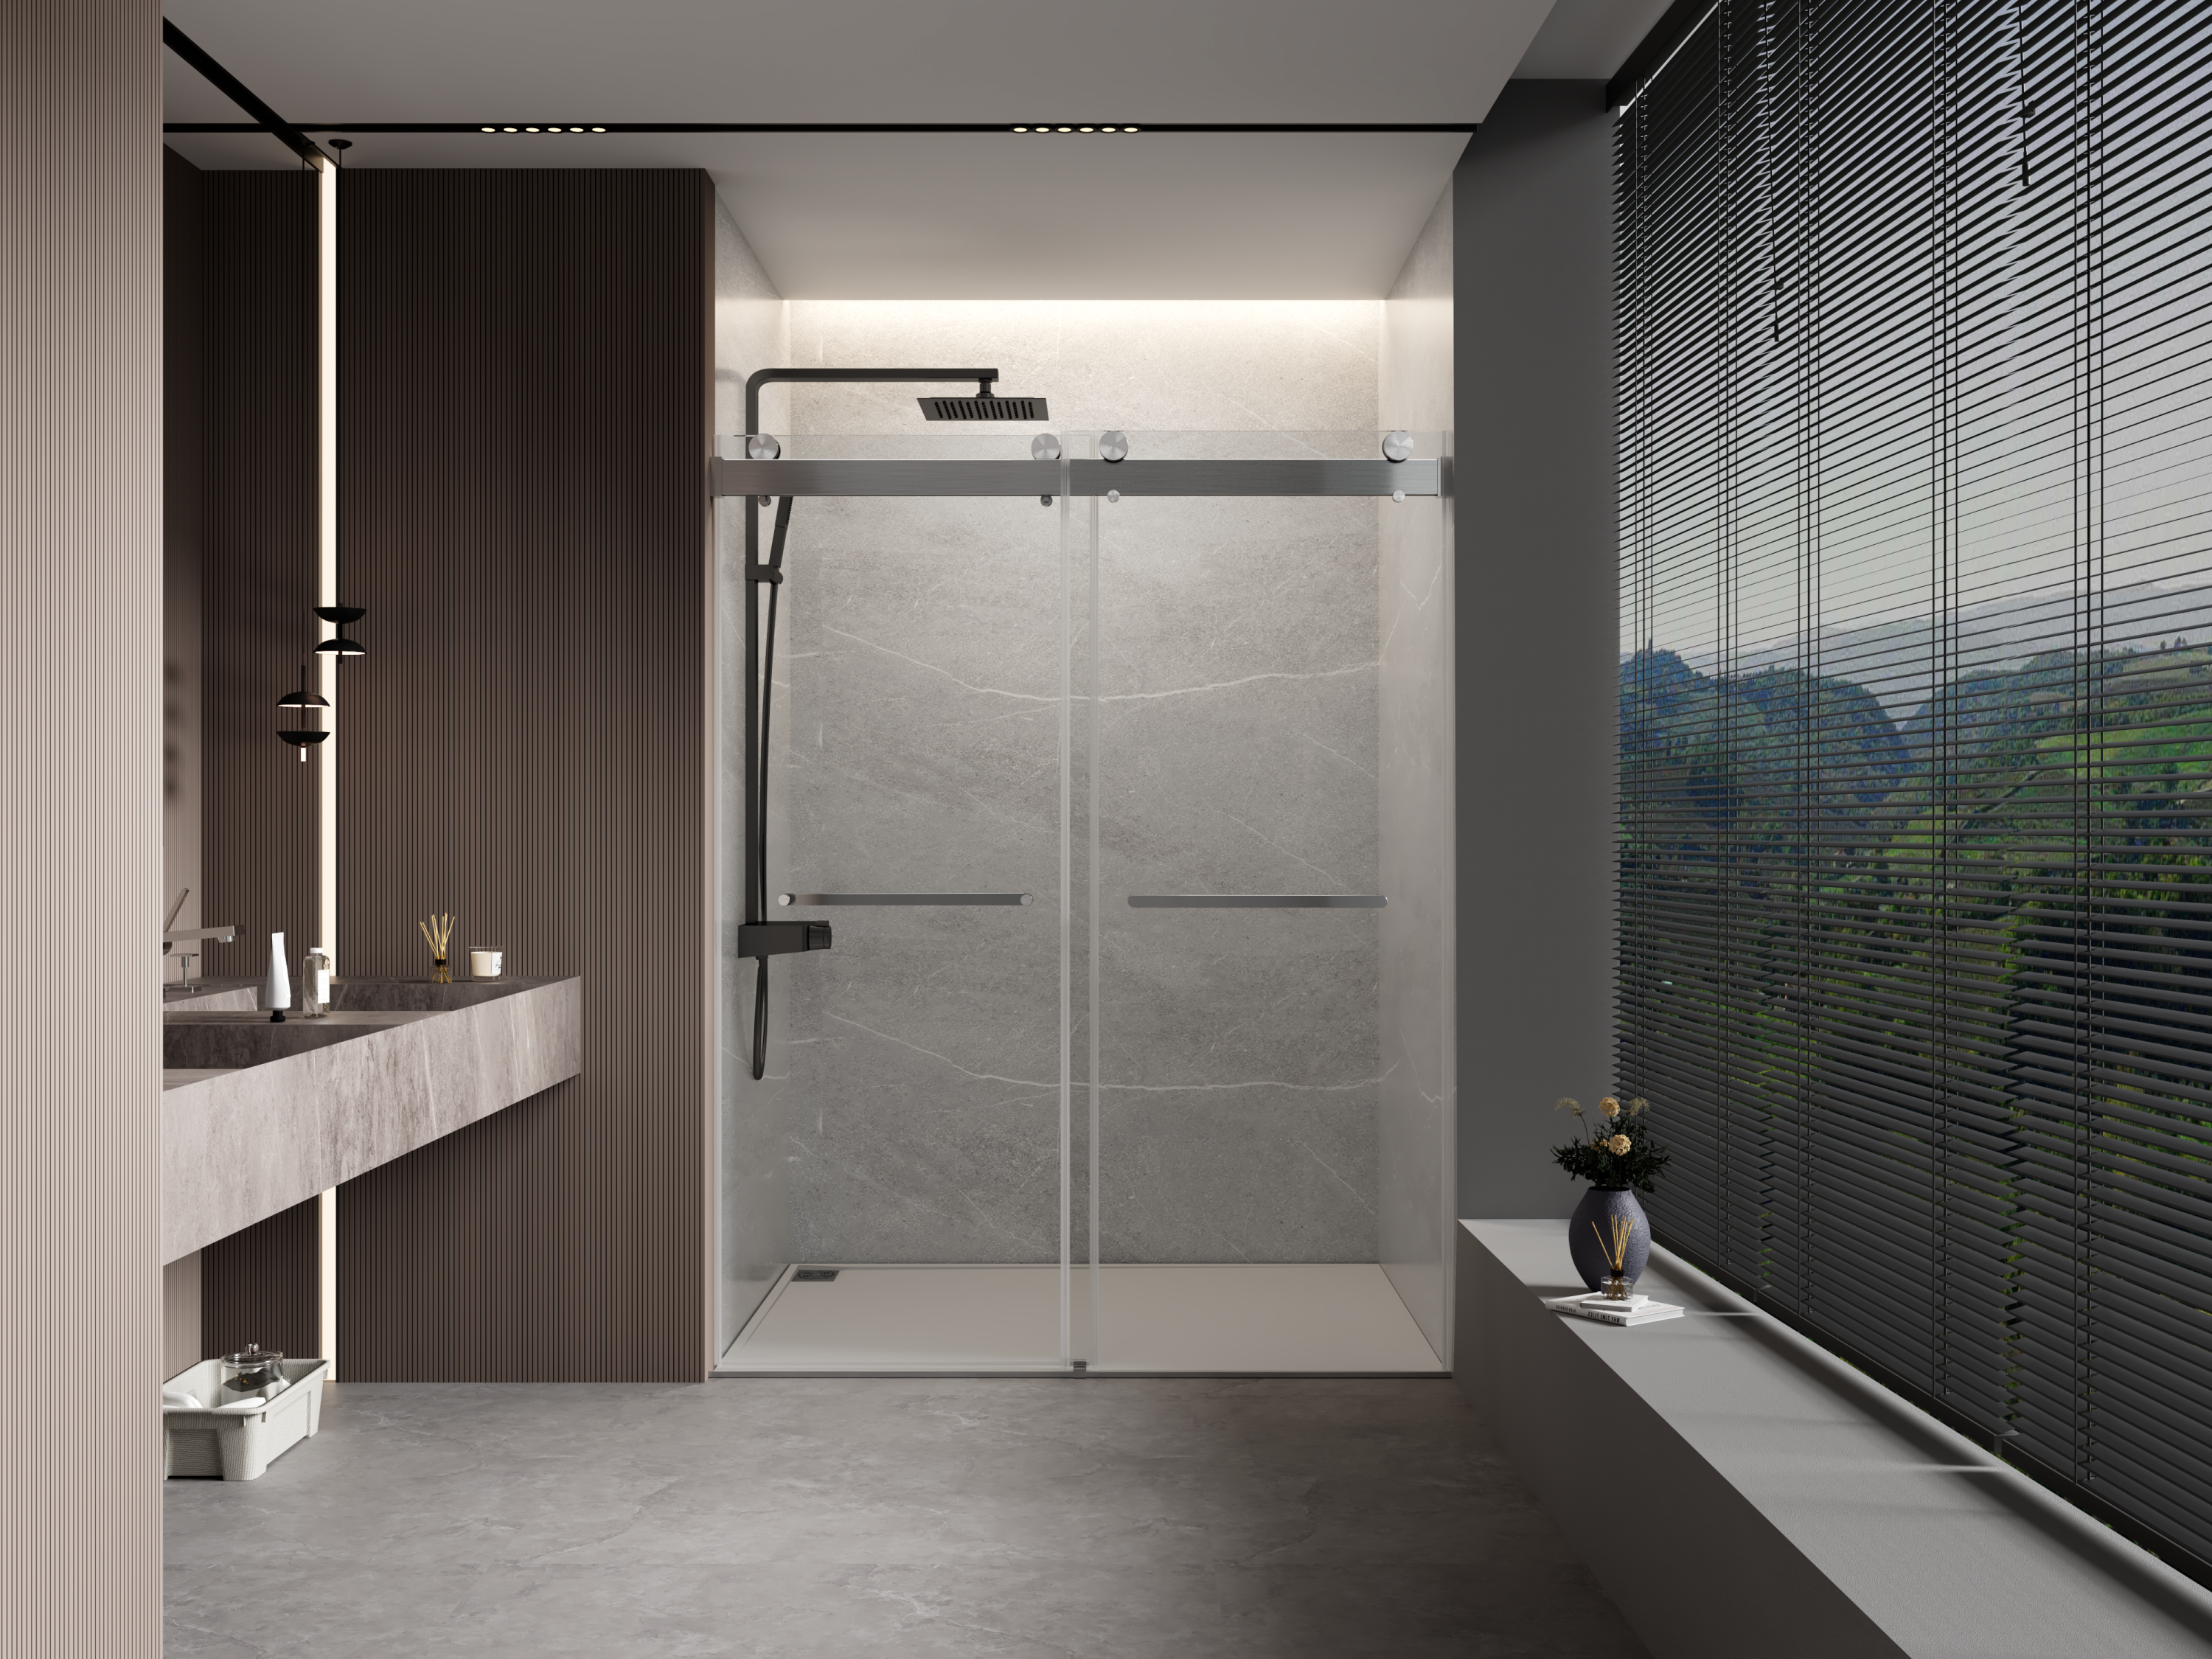 72" W x 76" H Double Sliding Frameless Soft-Close Shower Door with Premium 3/8 Inch